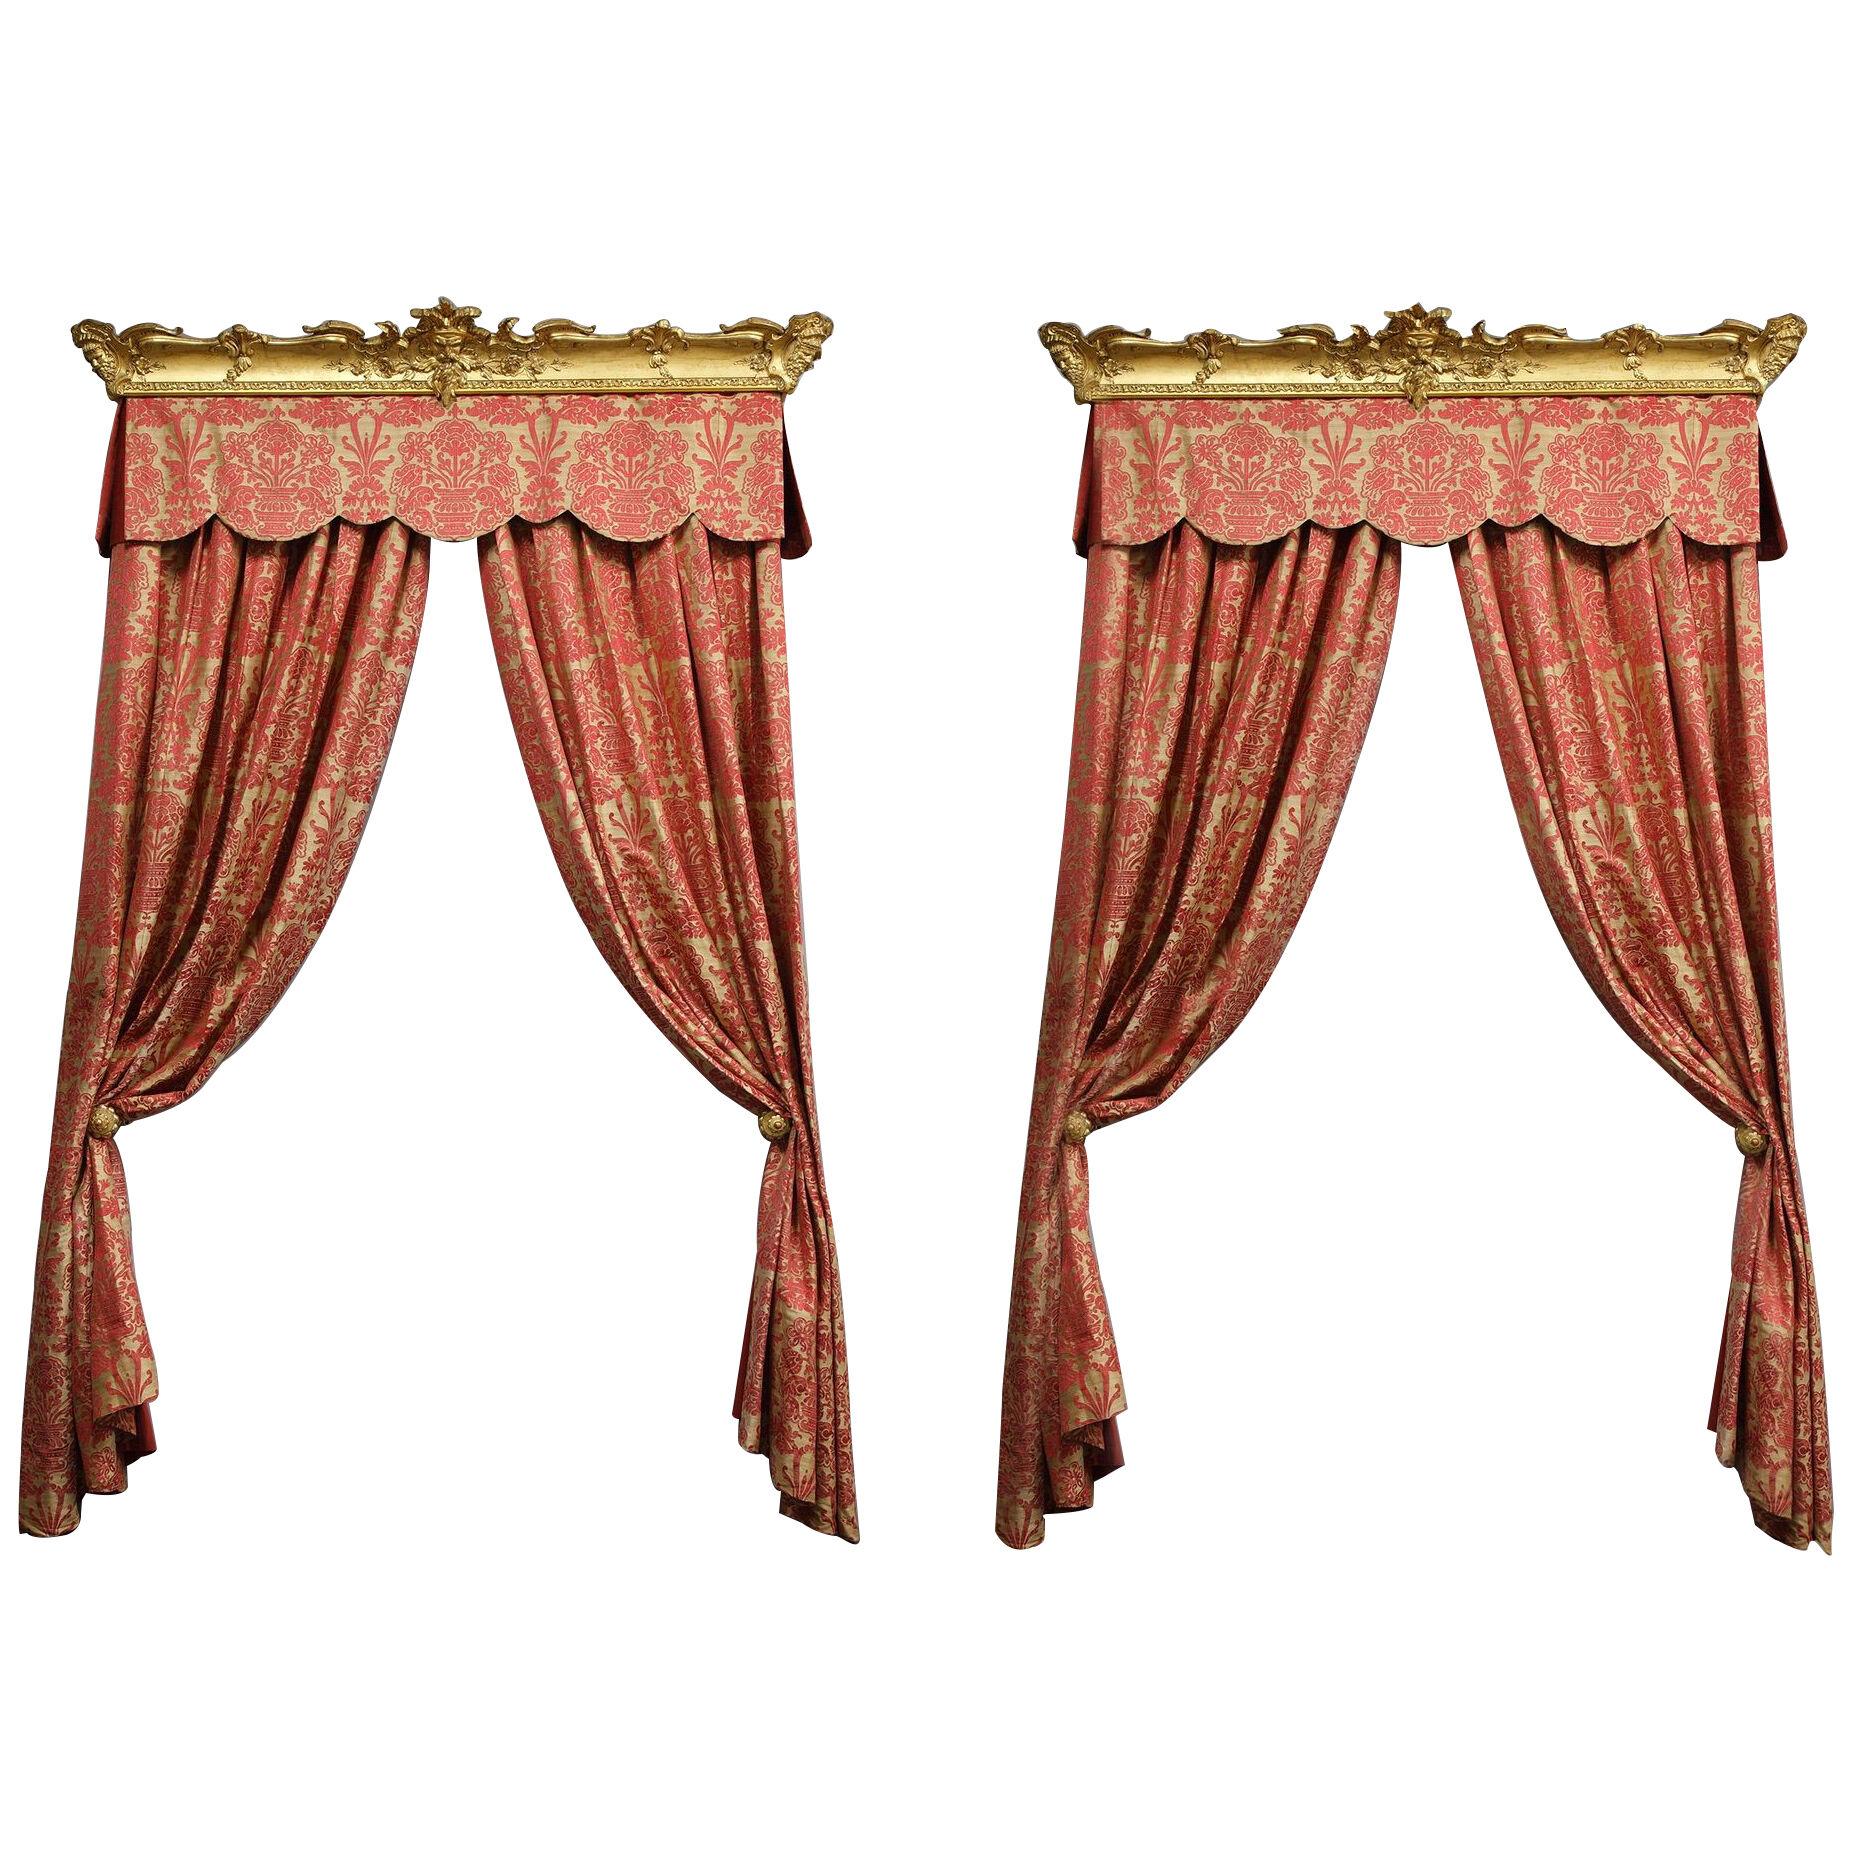 Two pairs of Fadini-Borghi curtains and their valances 